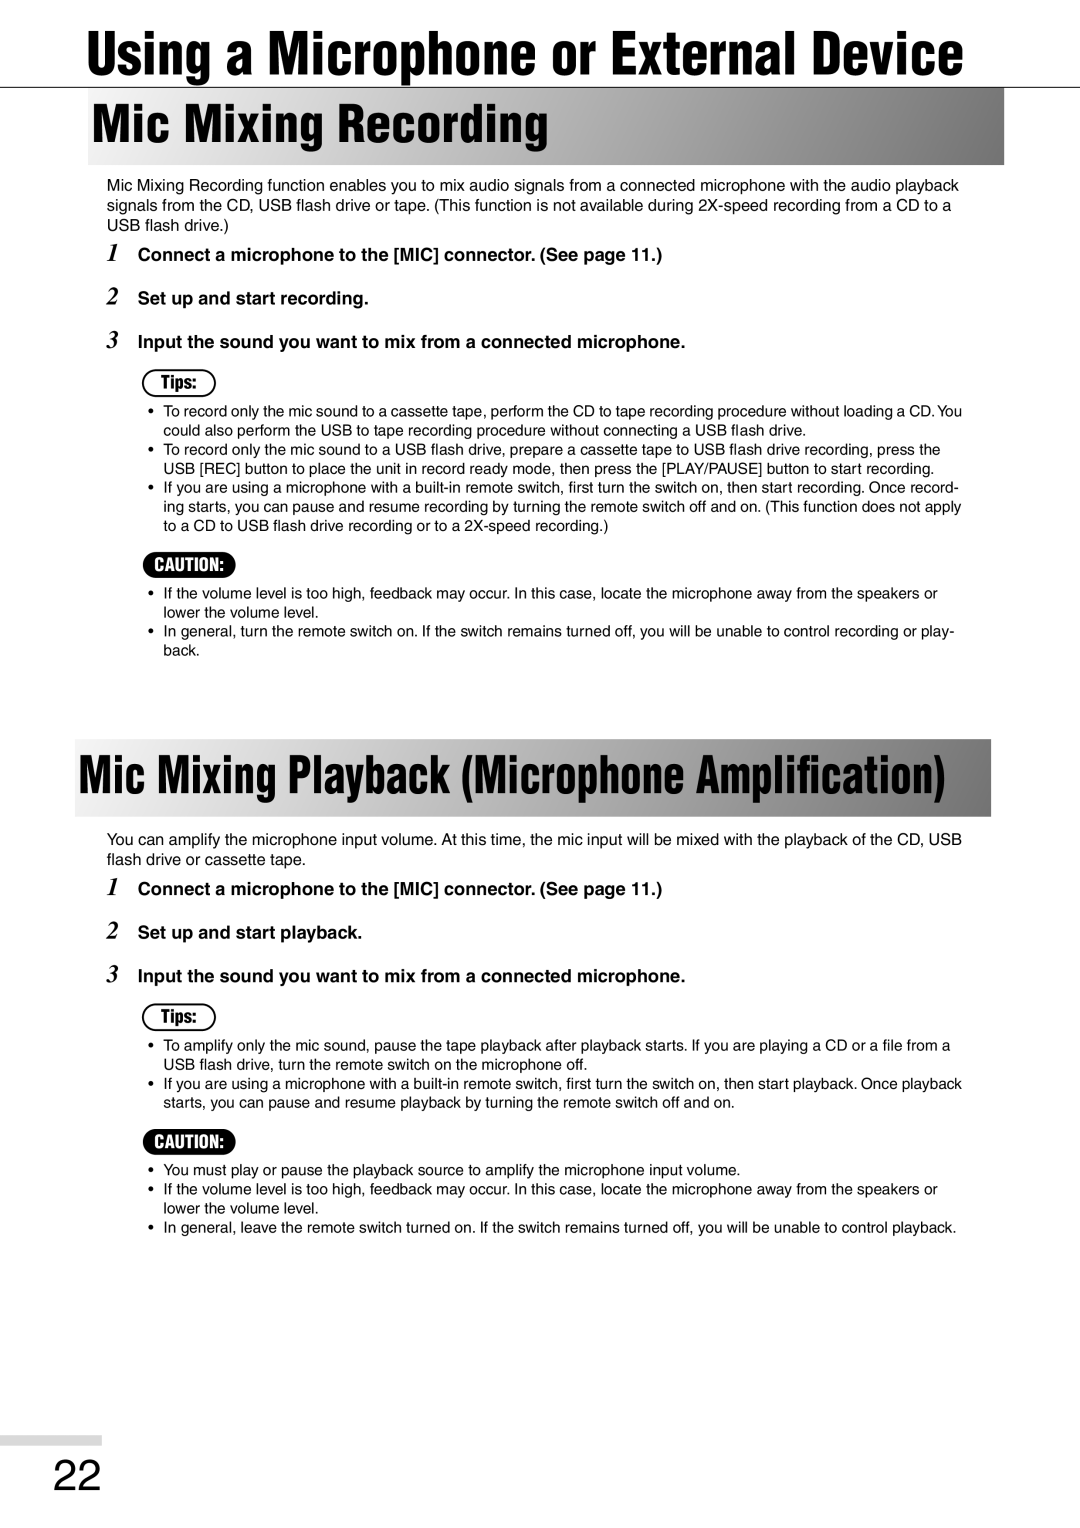 Eiki 8080 Mic Mixing Recording, Mic Mixing Playback Microphone Ampliﬁcation, Using a Microphone or External Device, 1 2 3 